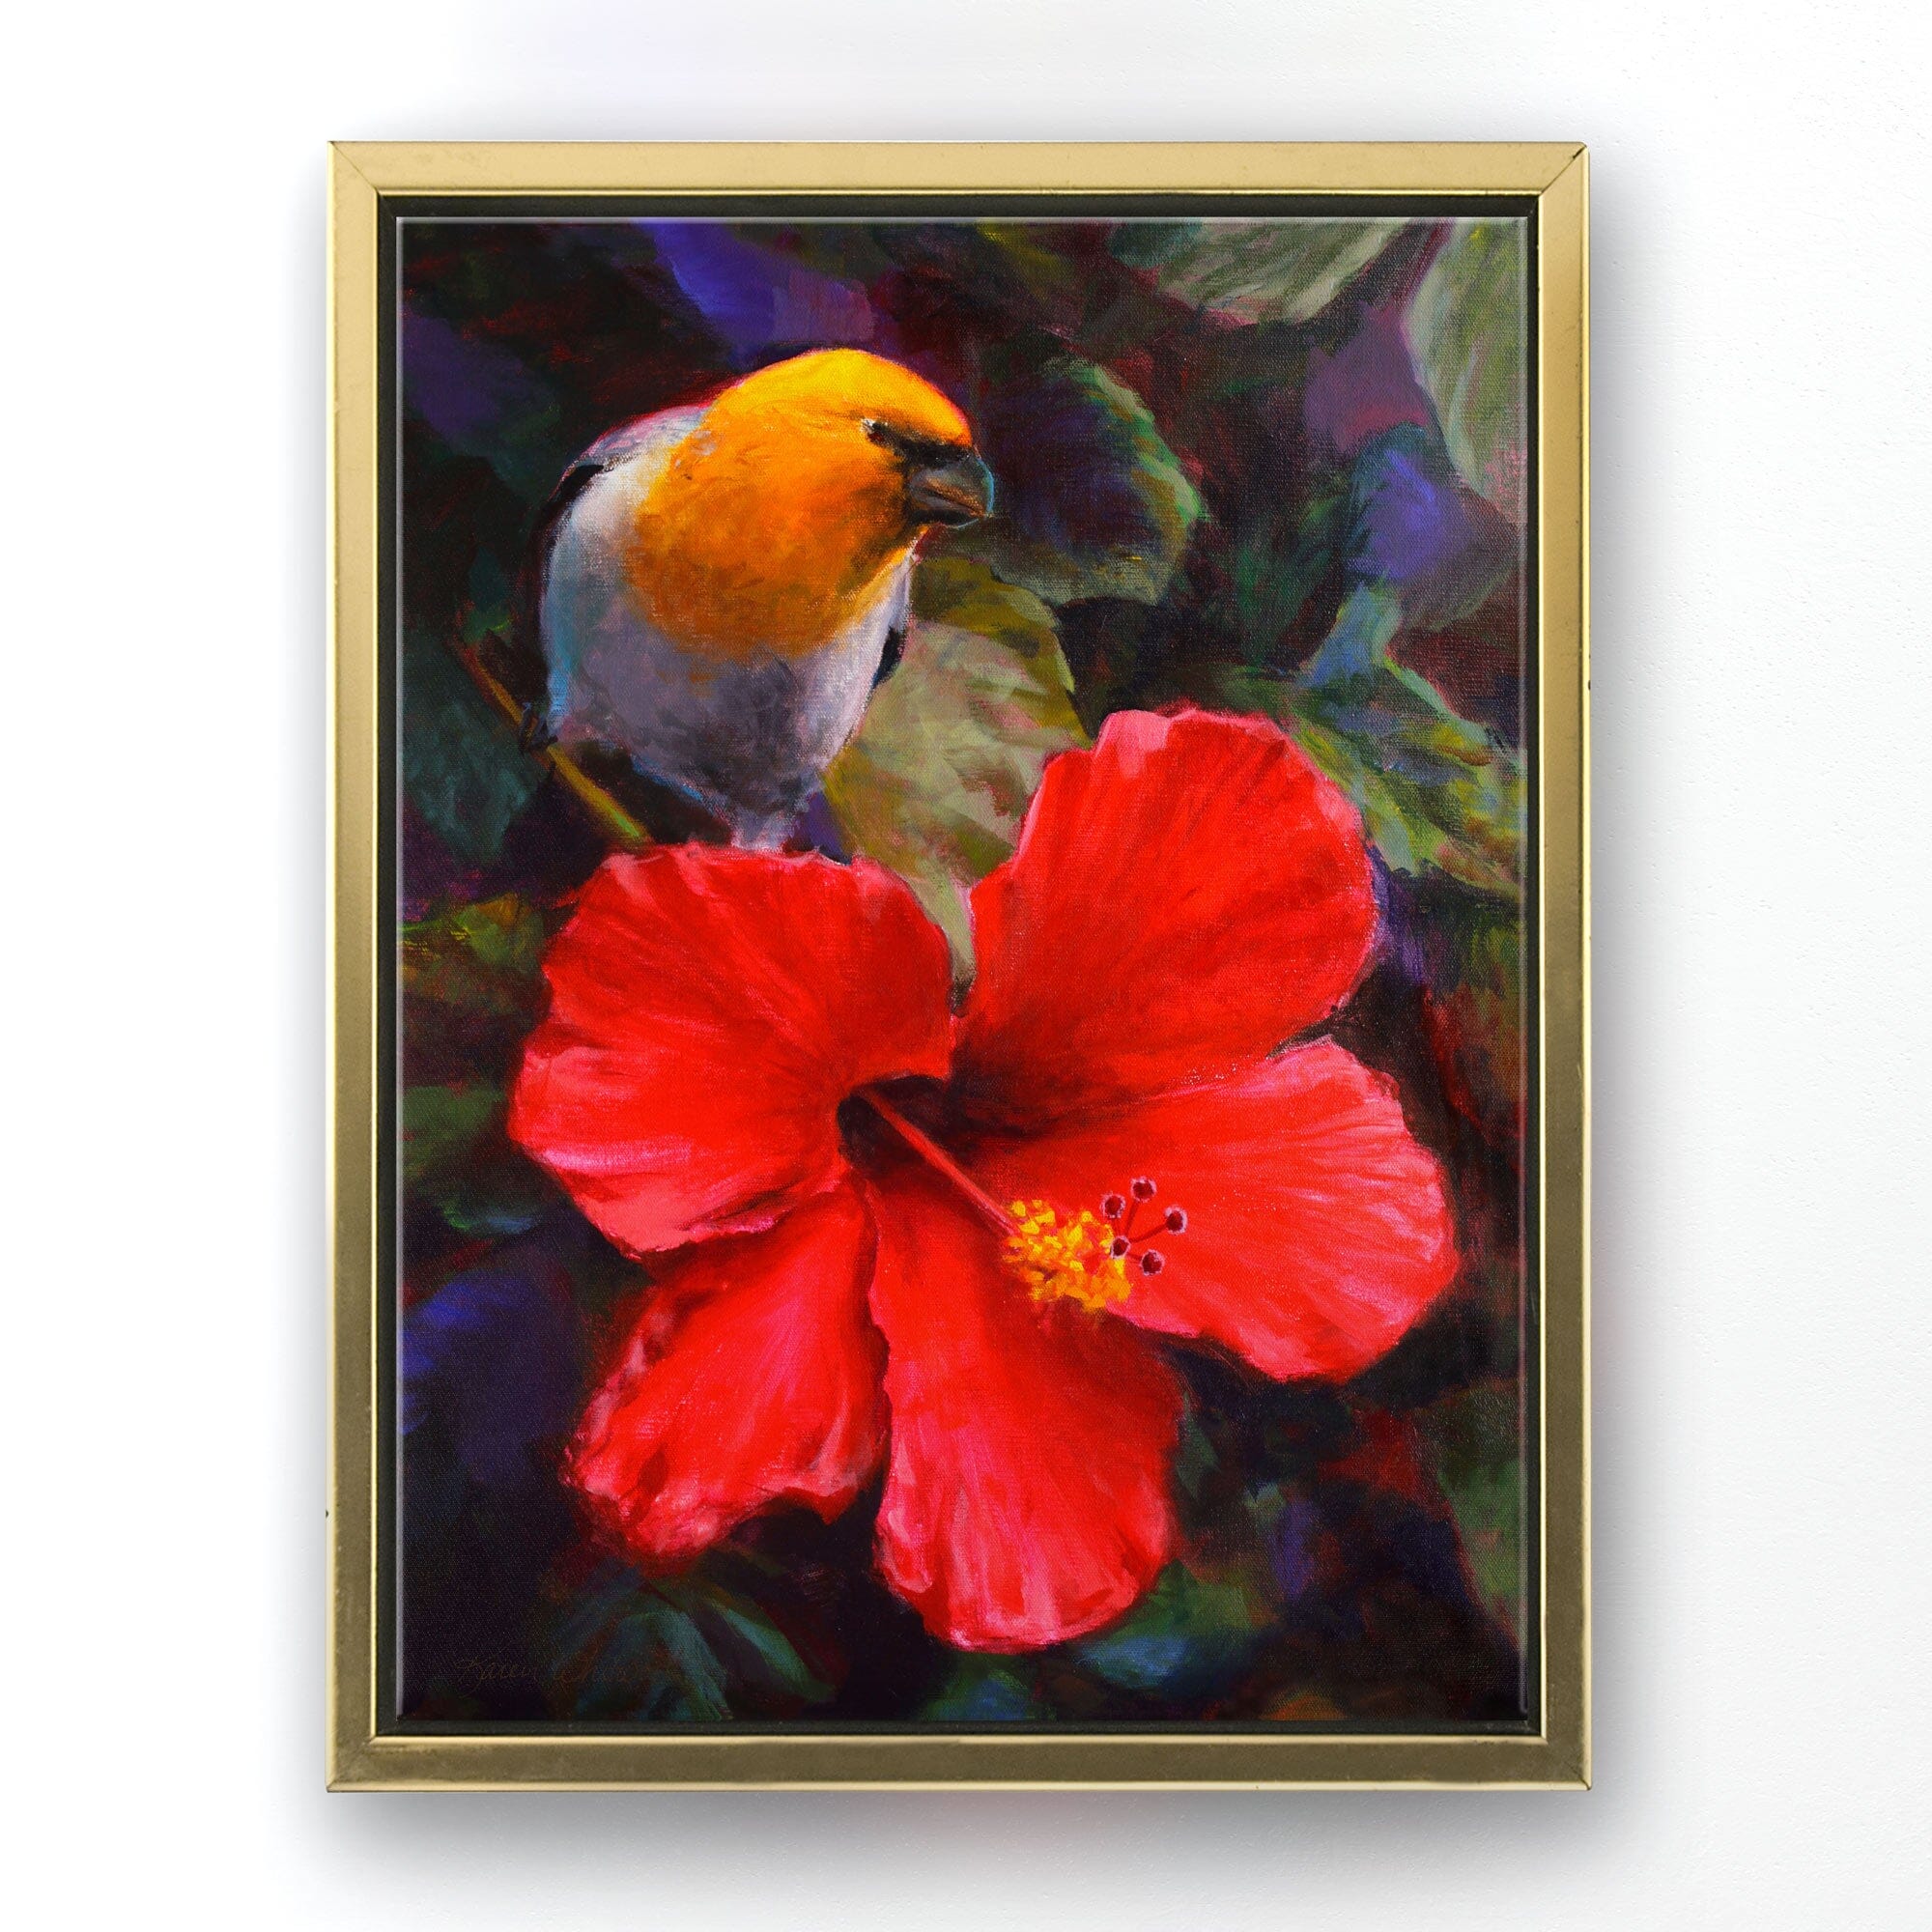 Tropical canvas art of Native Hawaiian Koki'o 'ula Hibiscus flower and  and Palila bird by artist Karen Whitworth. The artwork is framed in a gold floater frame and is  hanging on a white wall.